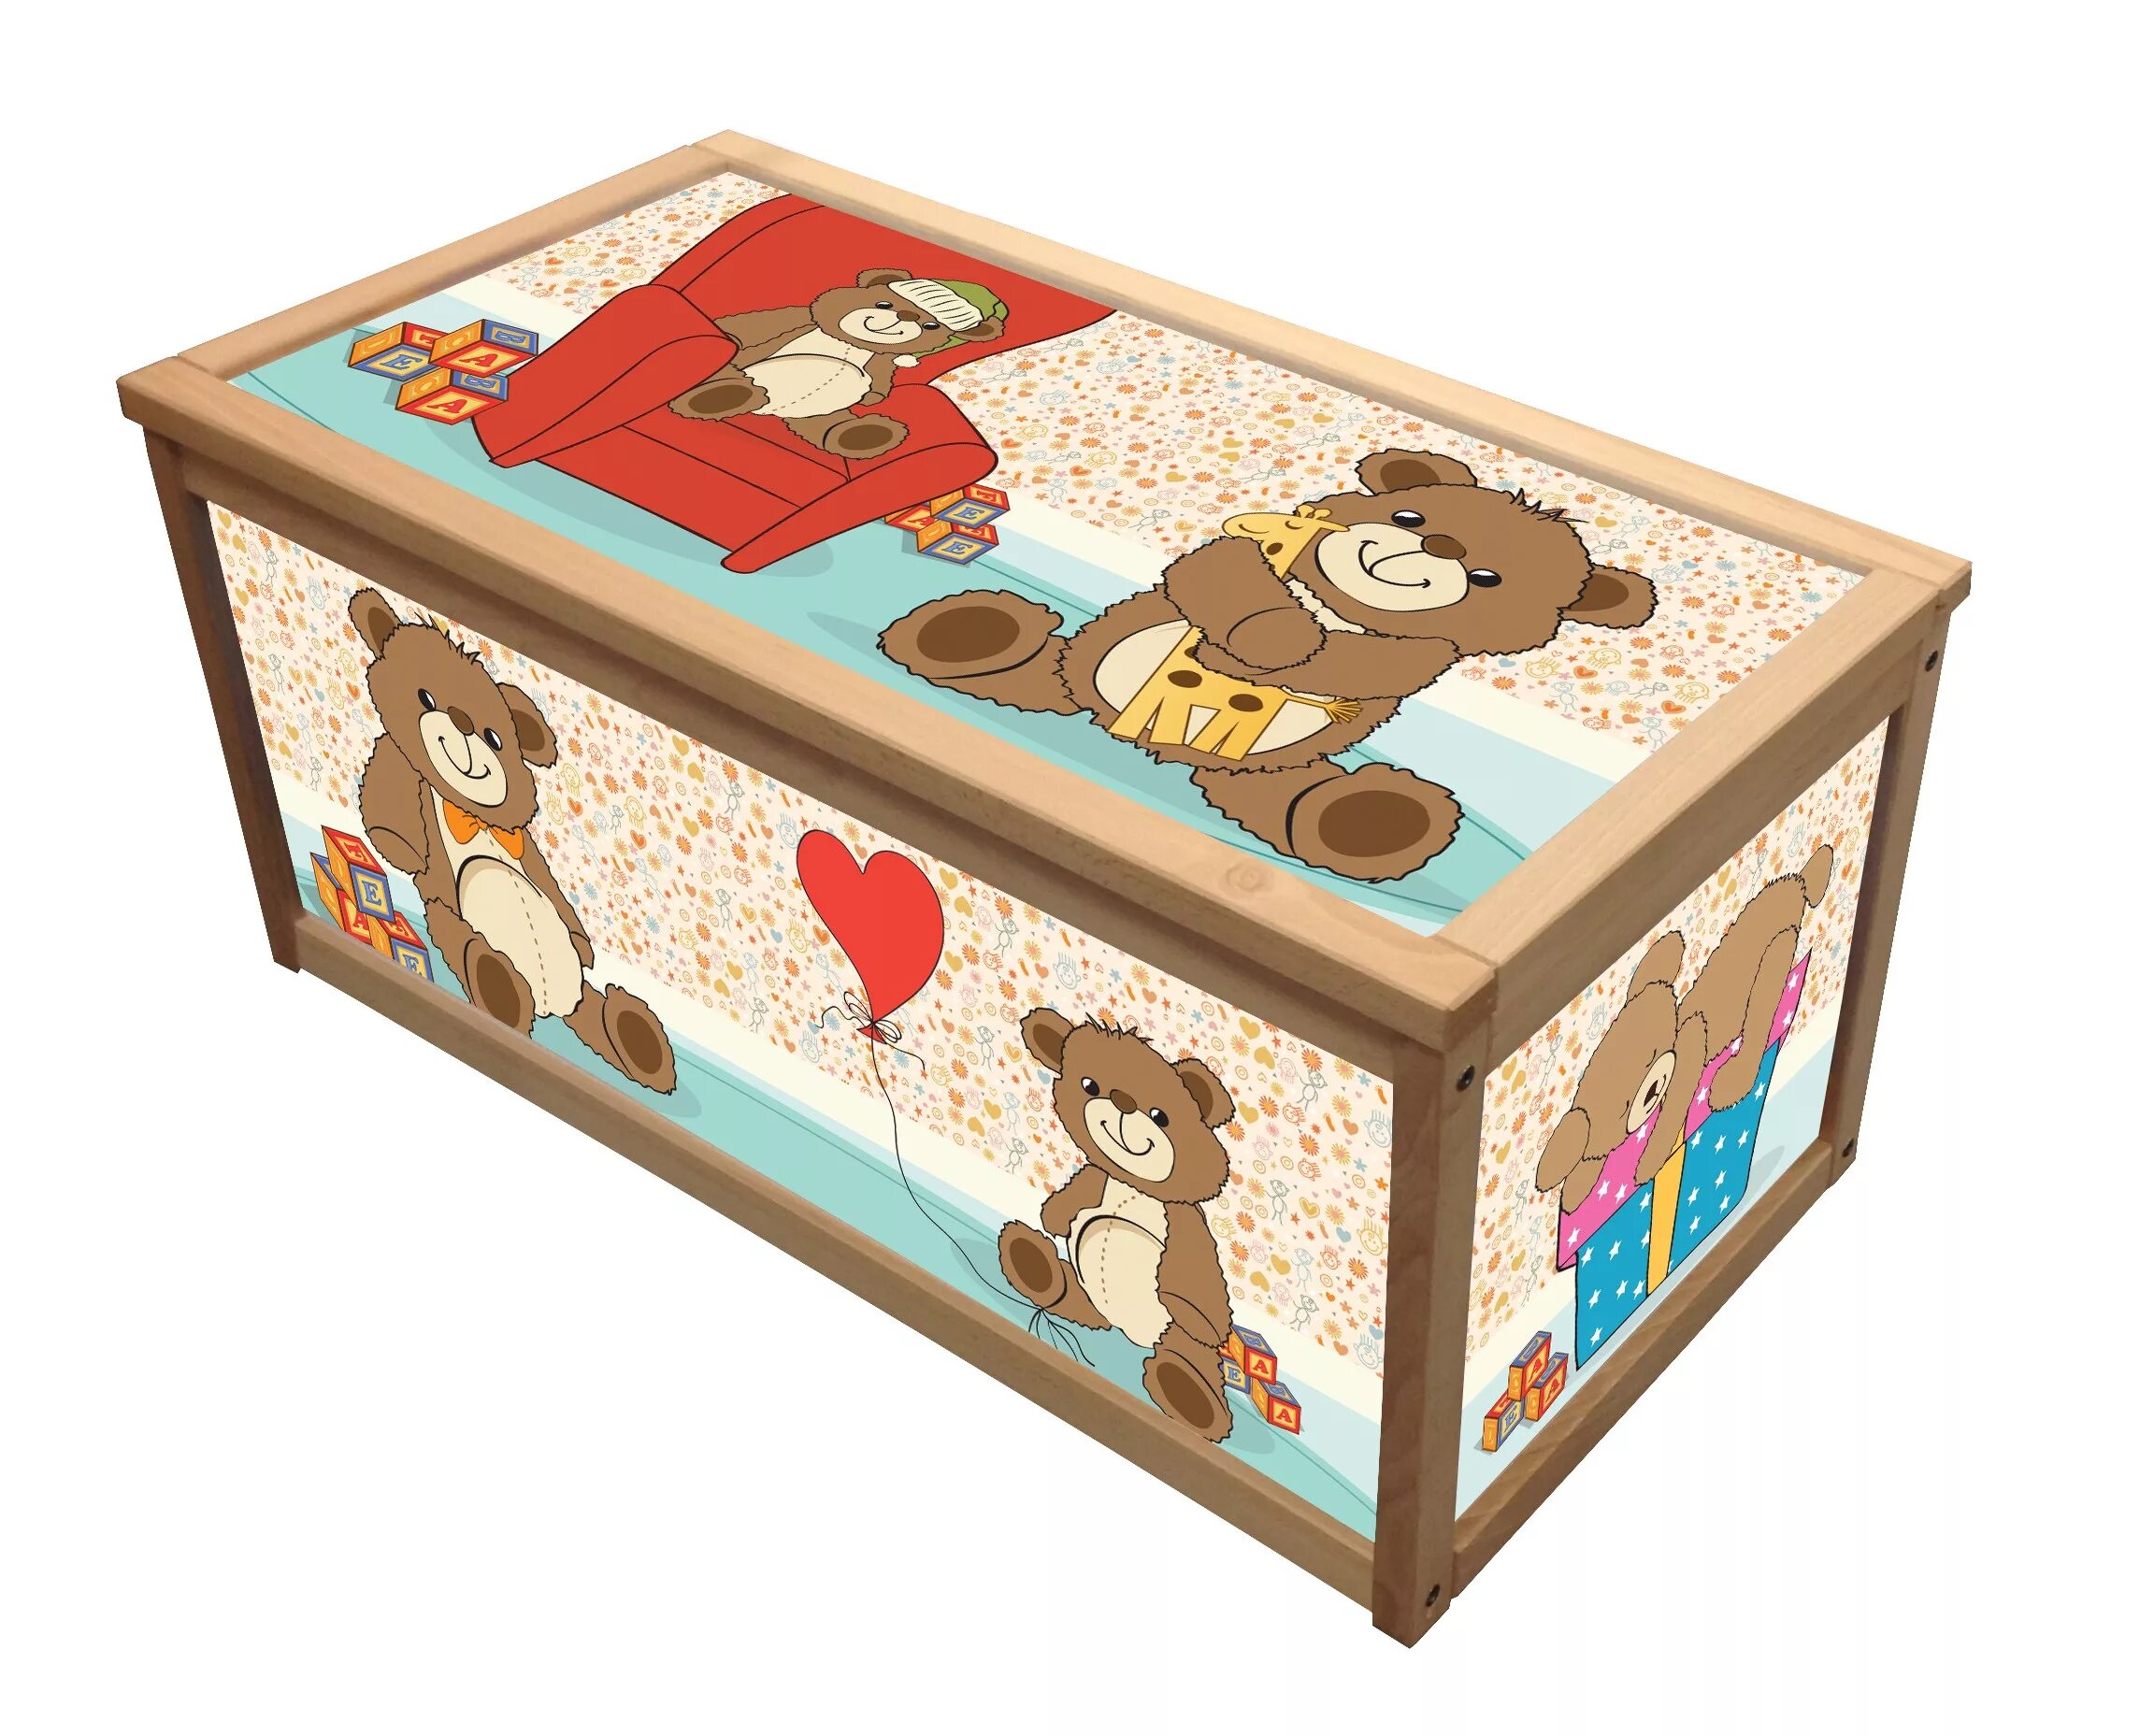 Has larry got a toy box. Toy Box for Kids. Kids Box игрушки. Toy Box Kids Box. Kid's Box Toybox.